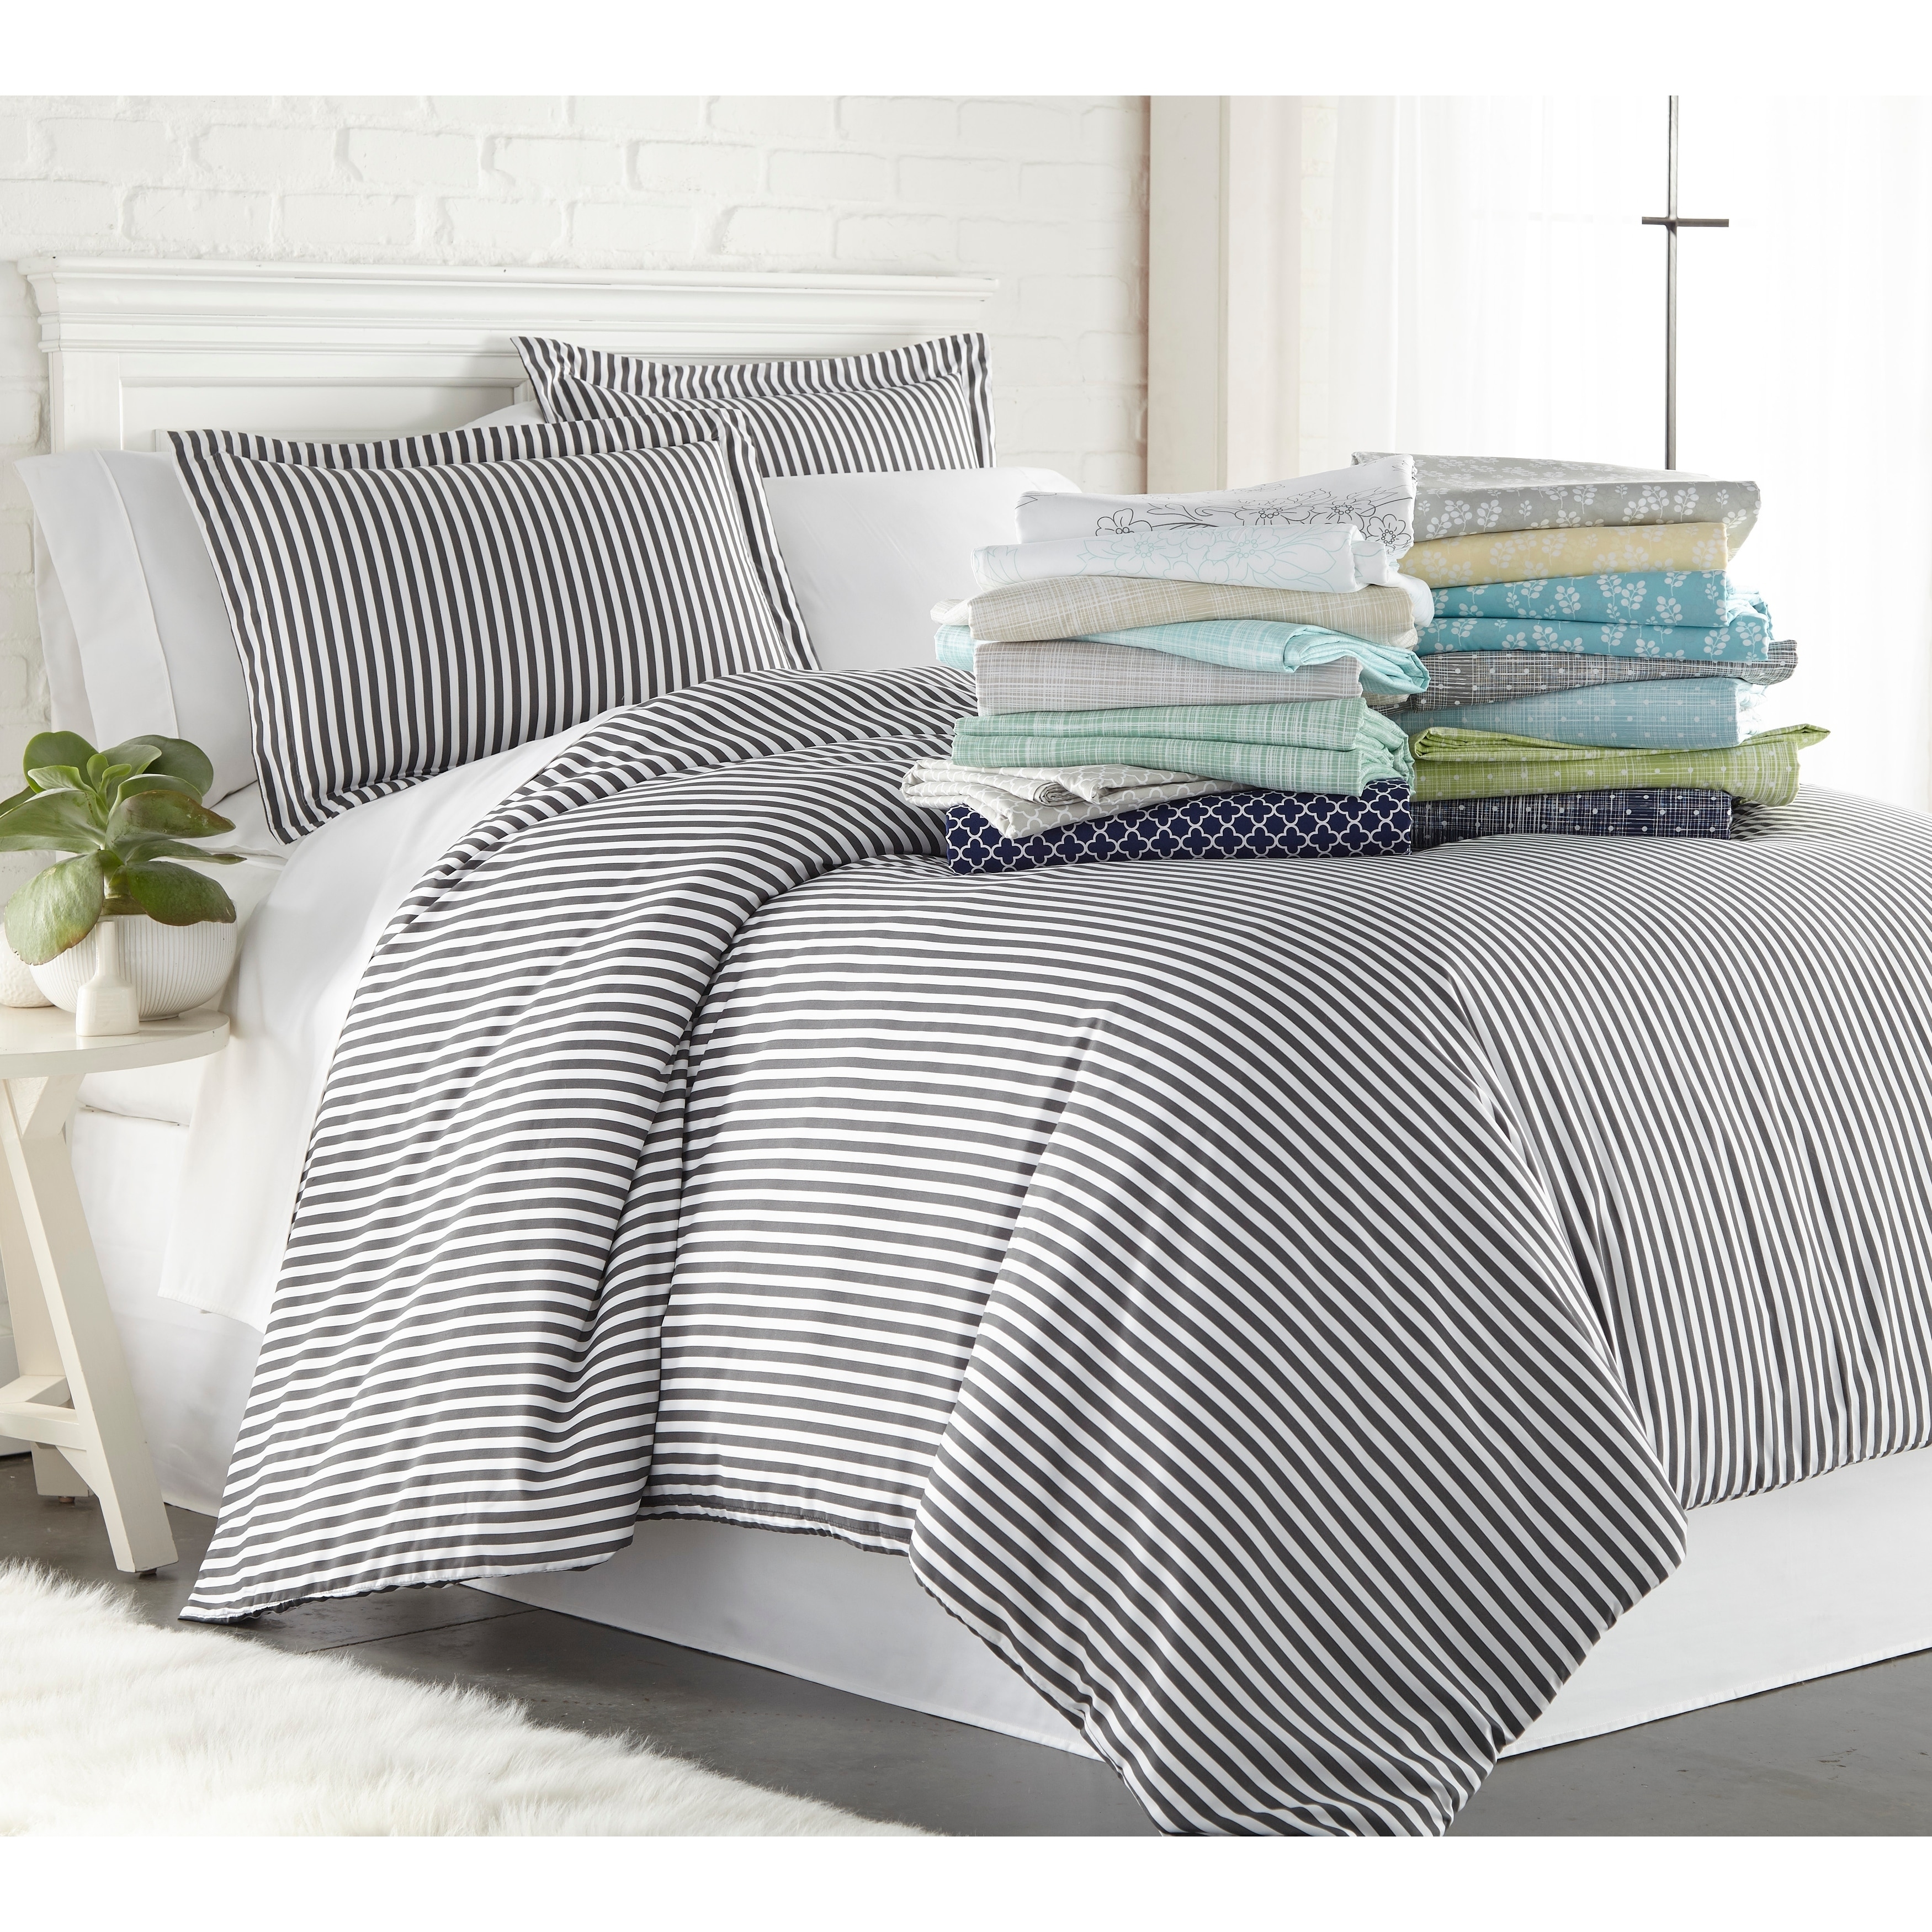 Grey Becky Cameron Duvet Covers Sets Find Great Bedding Deals